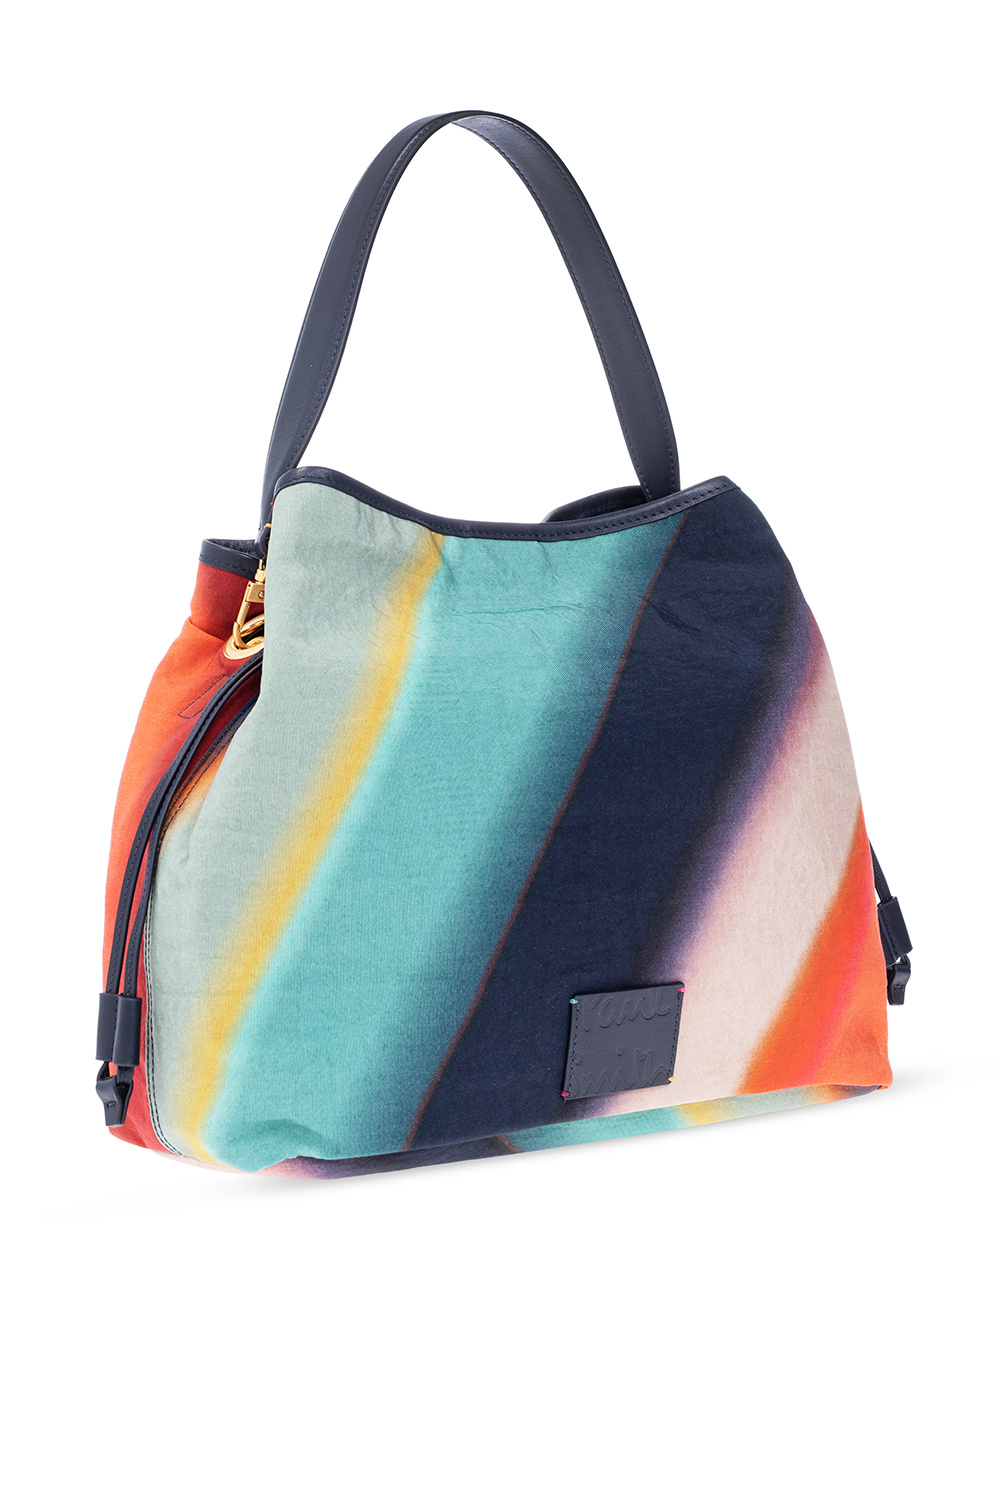 Paul Smith, Bags, Paul Smith Multicolor Leather Swirl Shoulder Bag Large